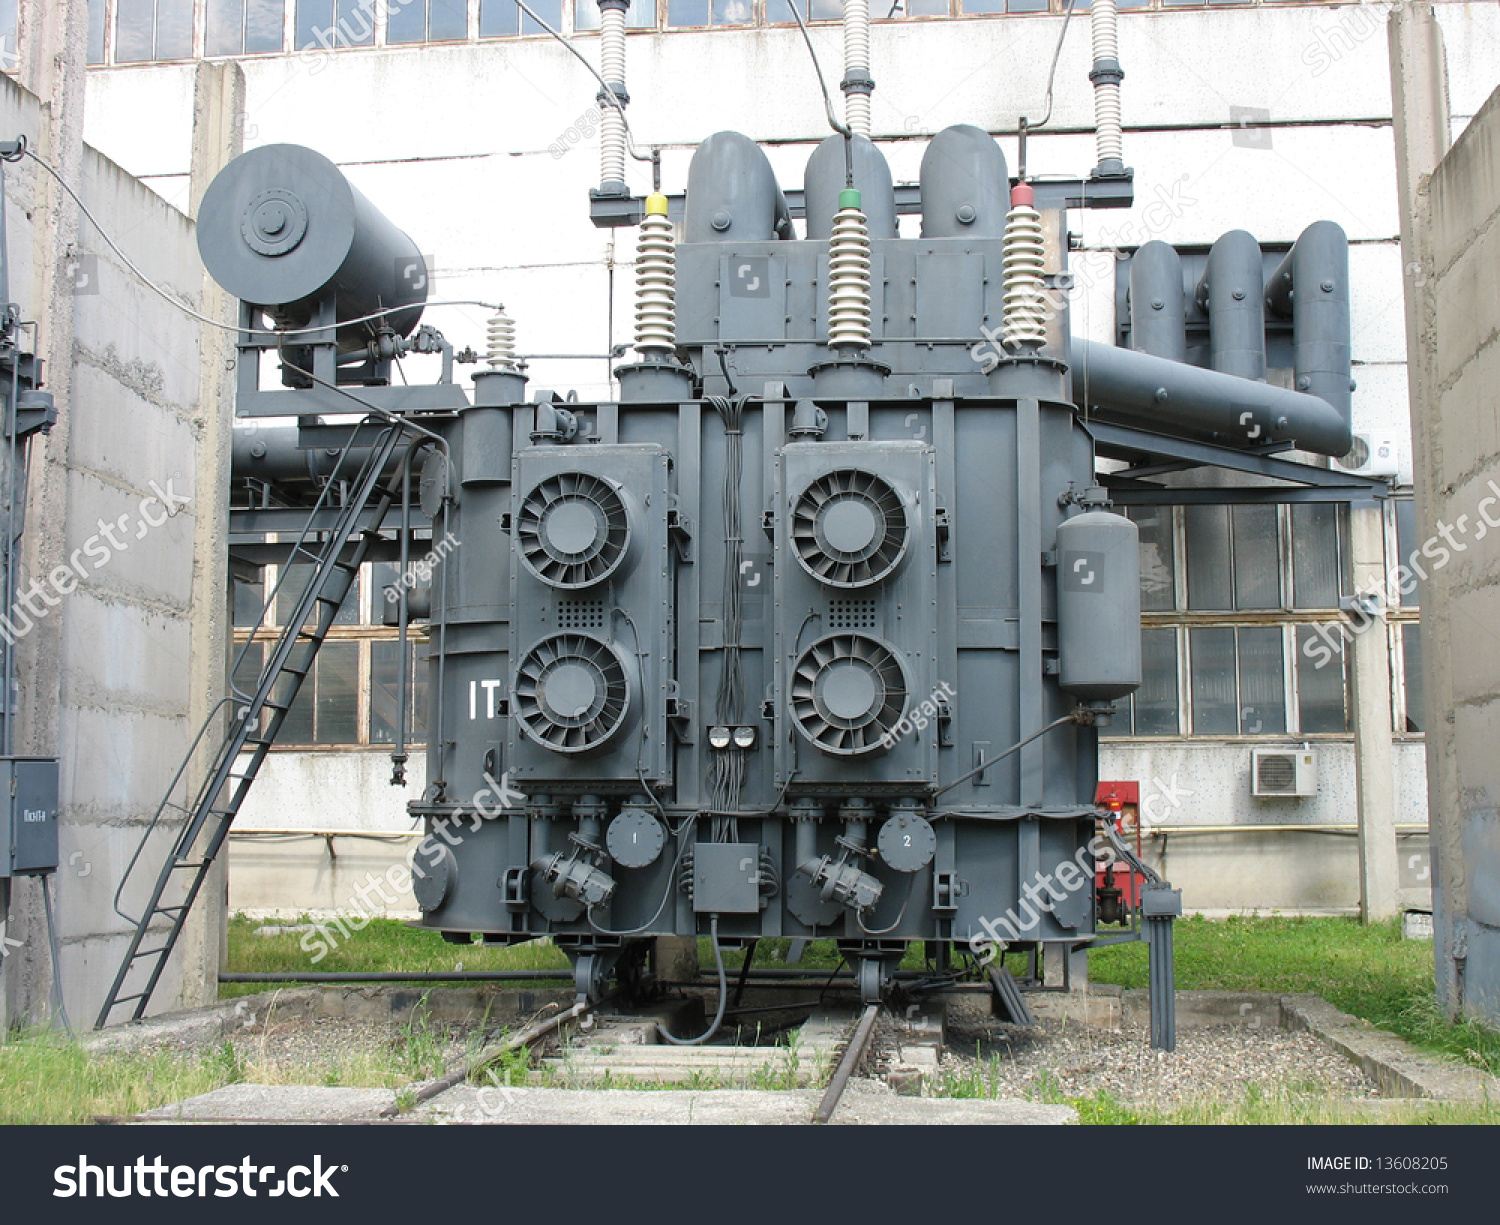 High Voltage Converter At A Power Plant Stock Photo 13608205 : Shutterstock